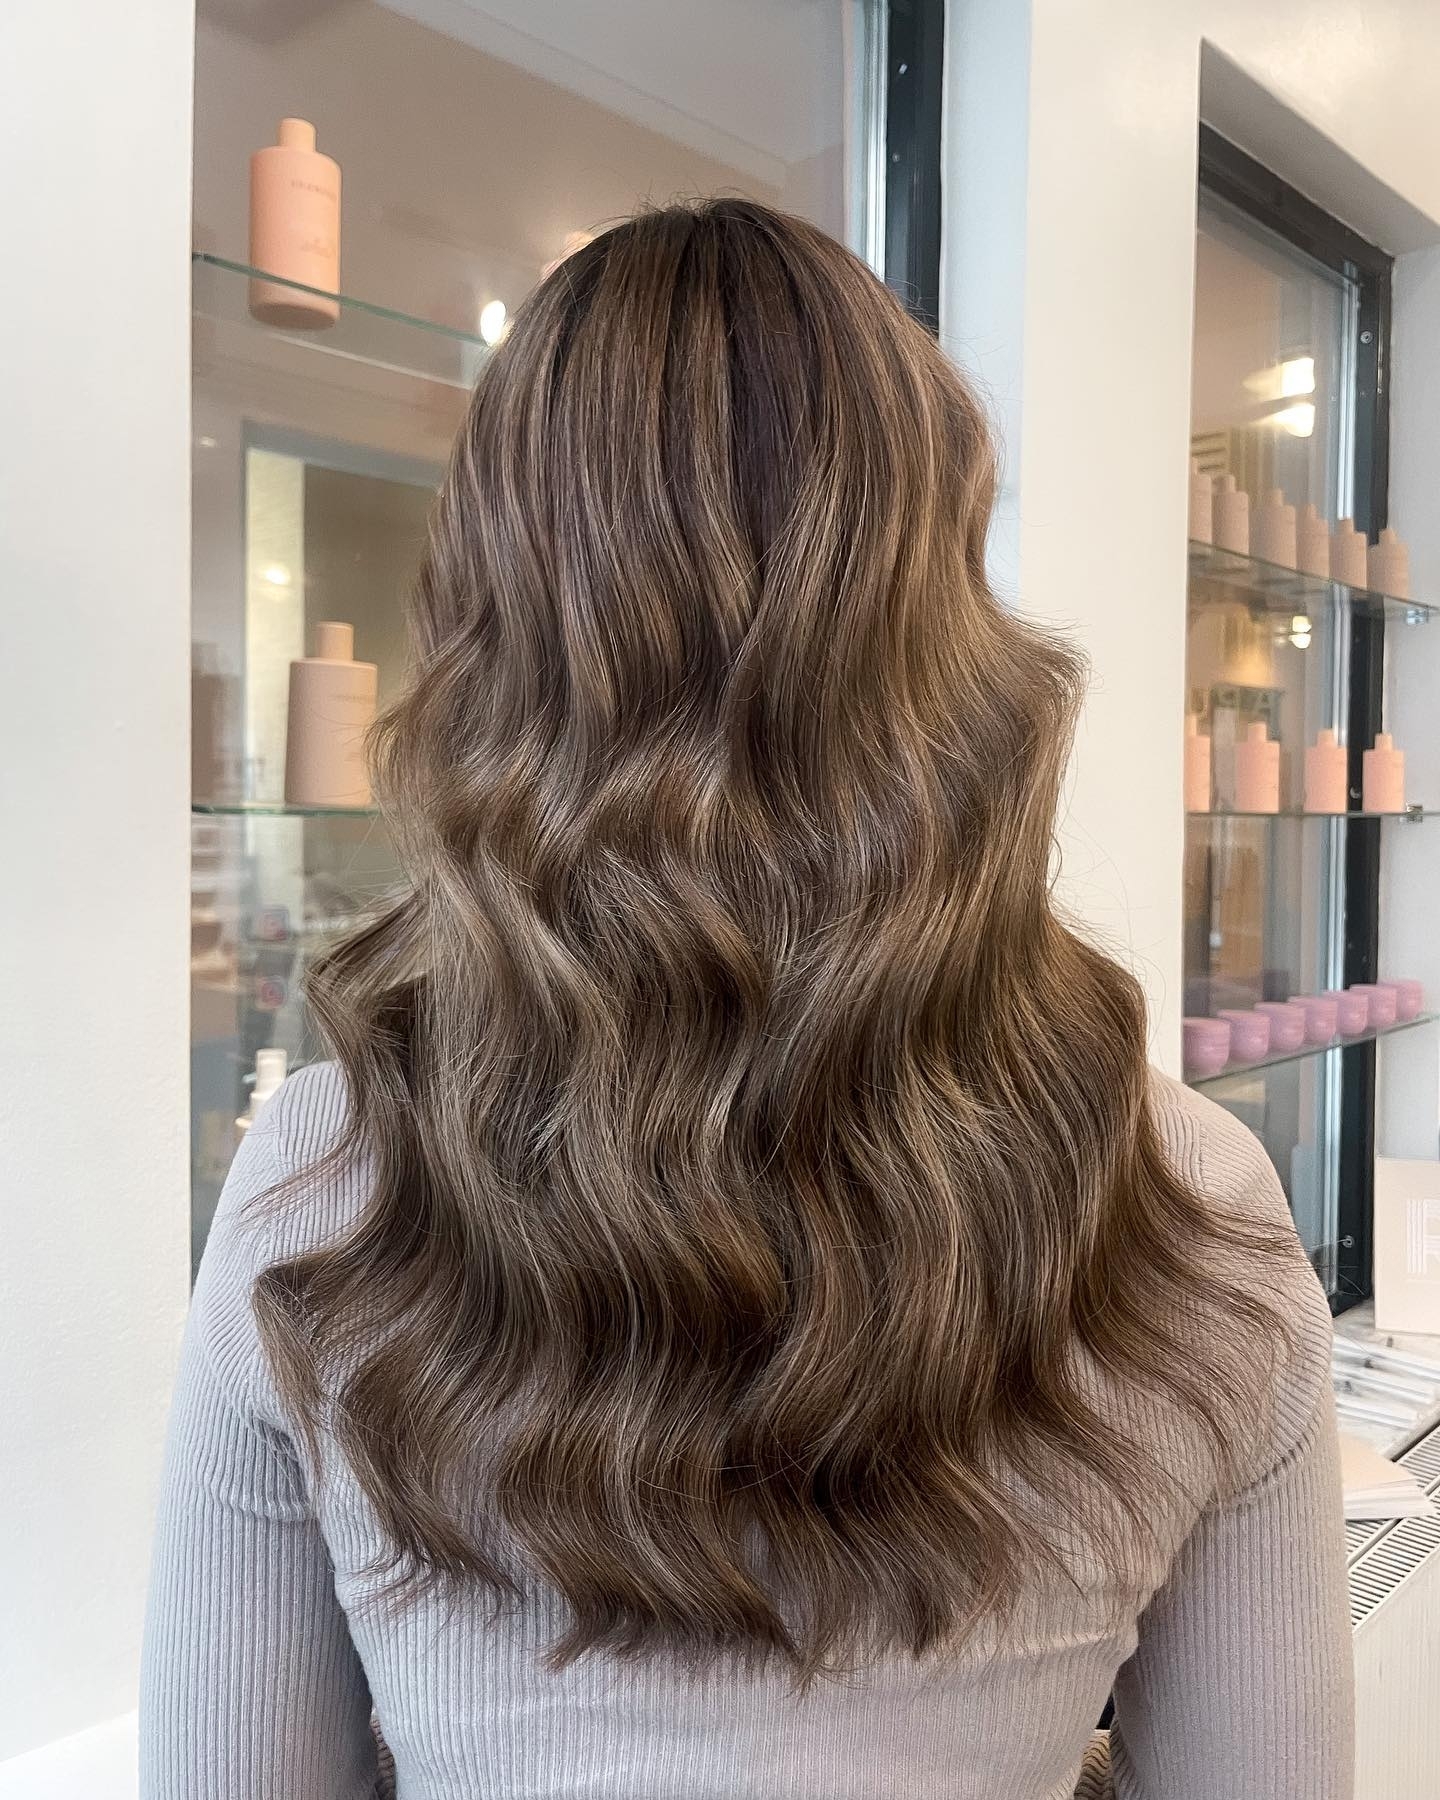 Photo from hairby.phillips with the caption Färg & extensions ✨
Bottenfärg: KP 66/0
Lowlights: CT 7/97 & 7/89
Nyansering: 9/97 & 7/1
Extensions 40cm: 
60g - B2.3/5.0 
60g - 2.0